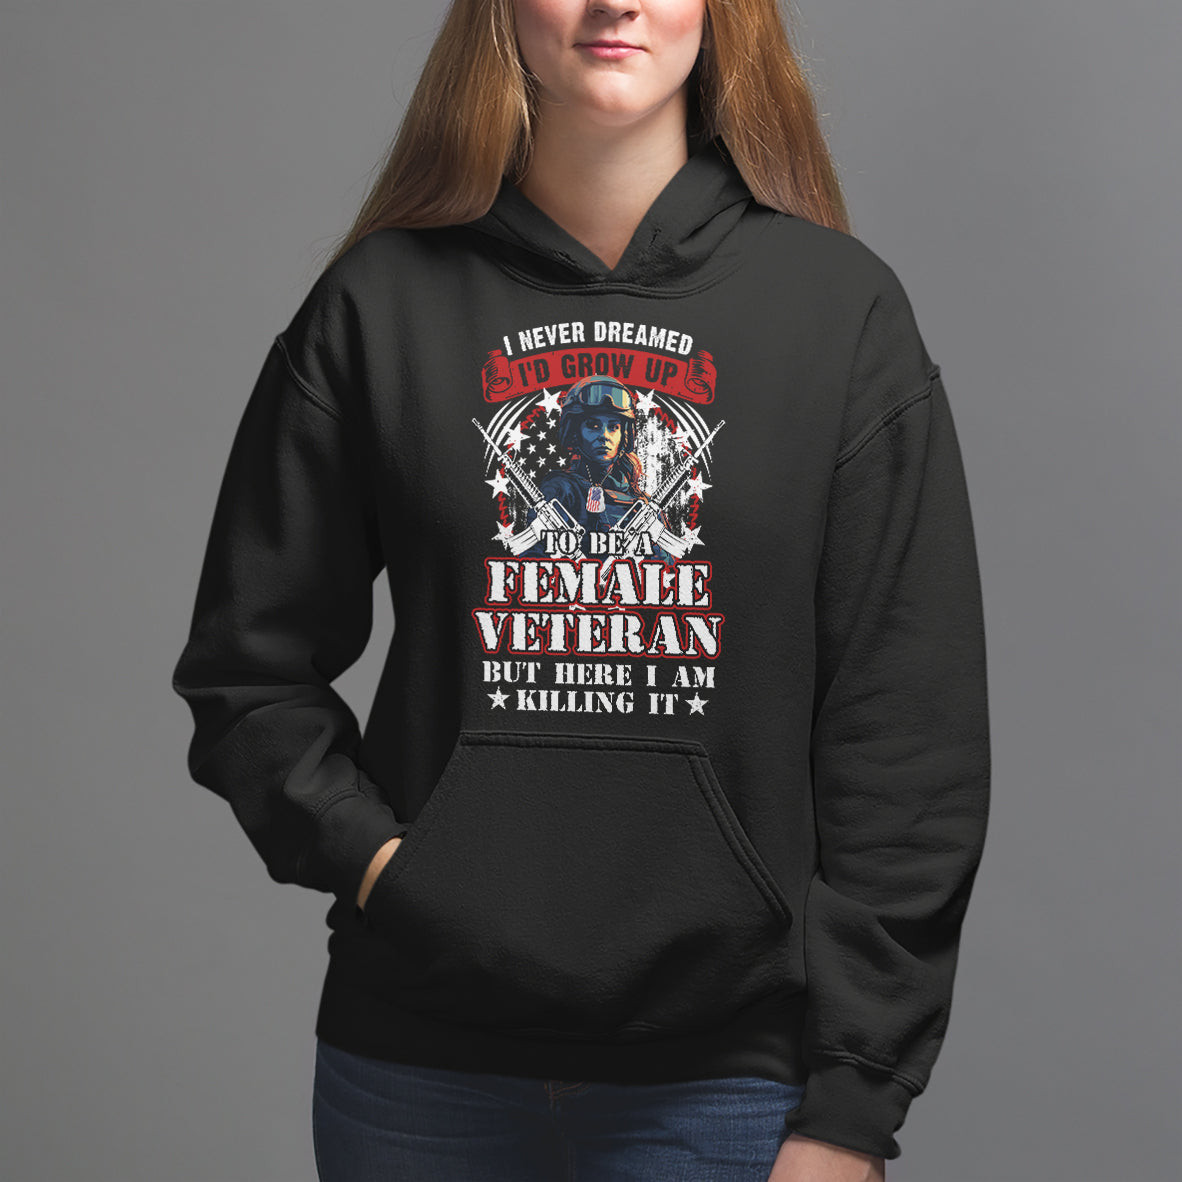 female-veteran-hoodie-i-never-dreamed-id-grow-up-to-be-but-here-i-am-killing-it-american-flag-dog-tags